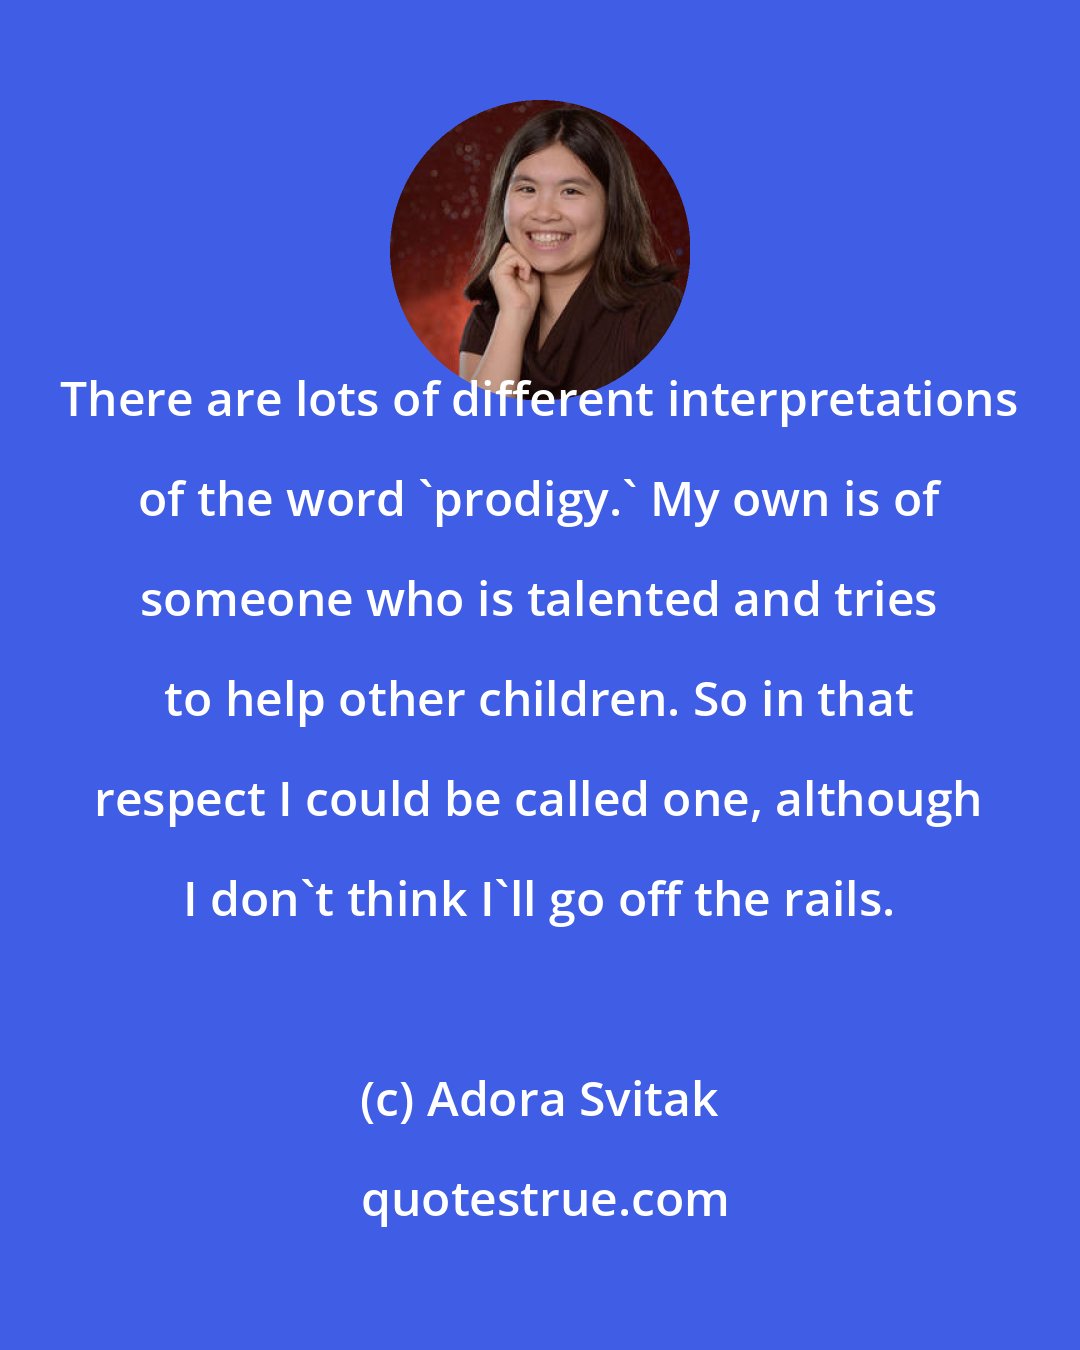 Adora Svitak: There are lots of different interpretations of the word 'prodigy.' My own is of someone who is talented and tries to help other children. So in that respect I could be called one, although I don't think I'll go off the rails.